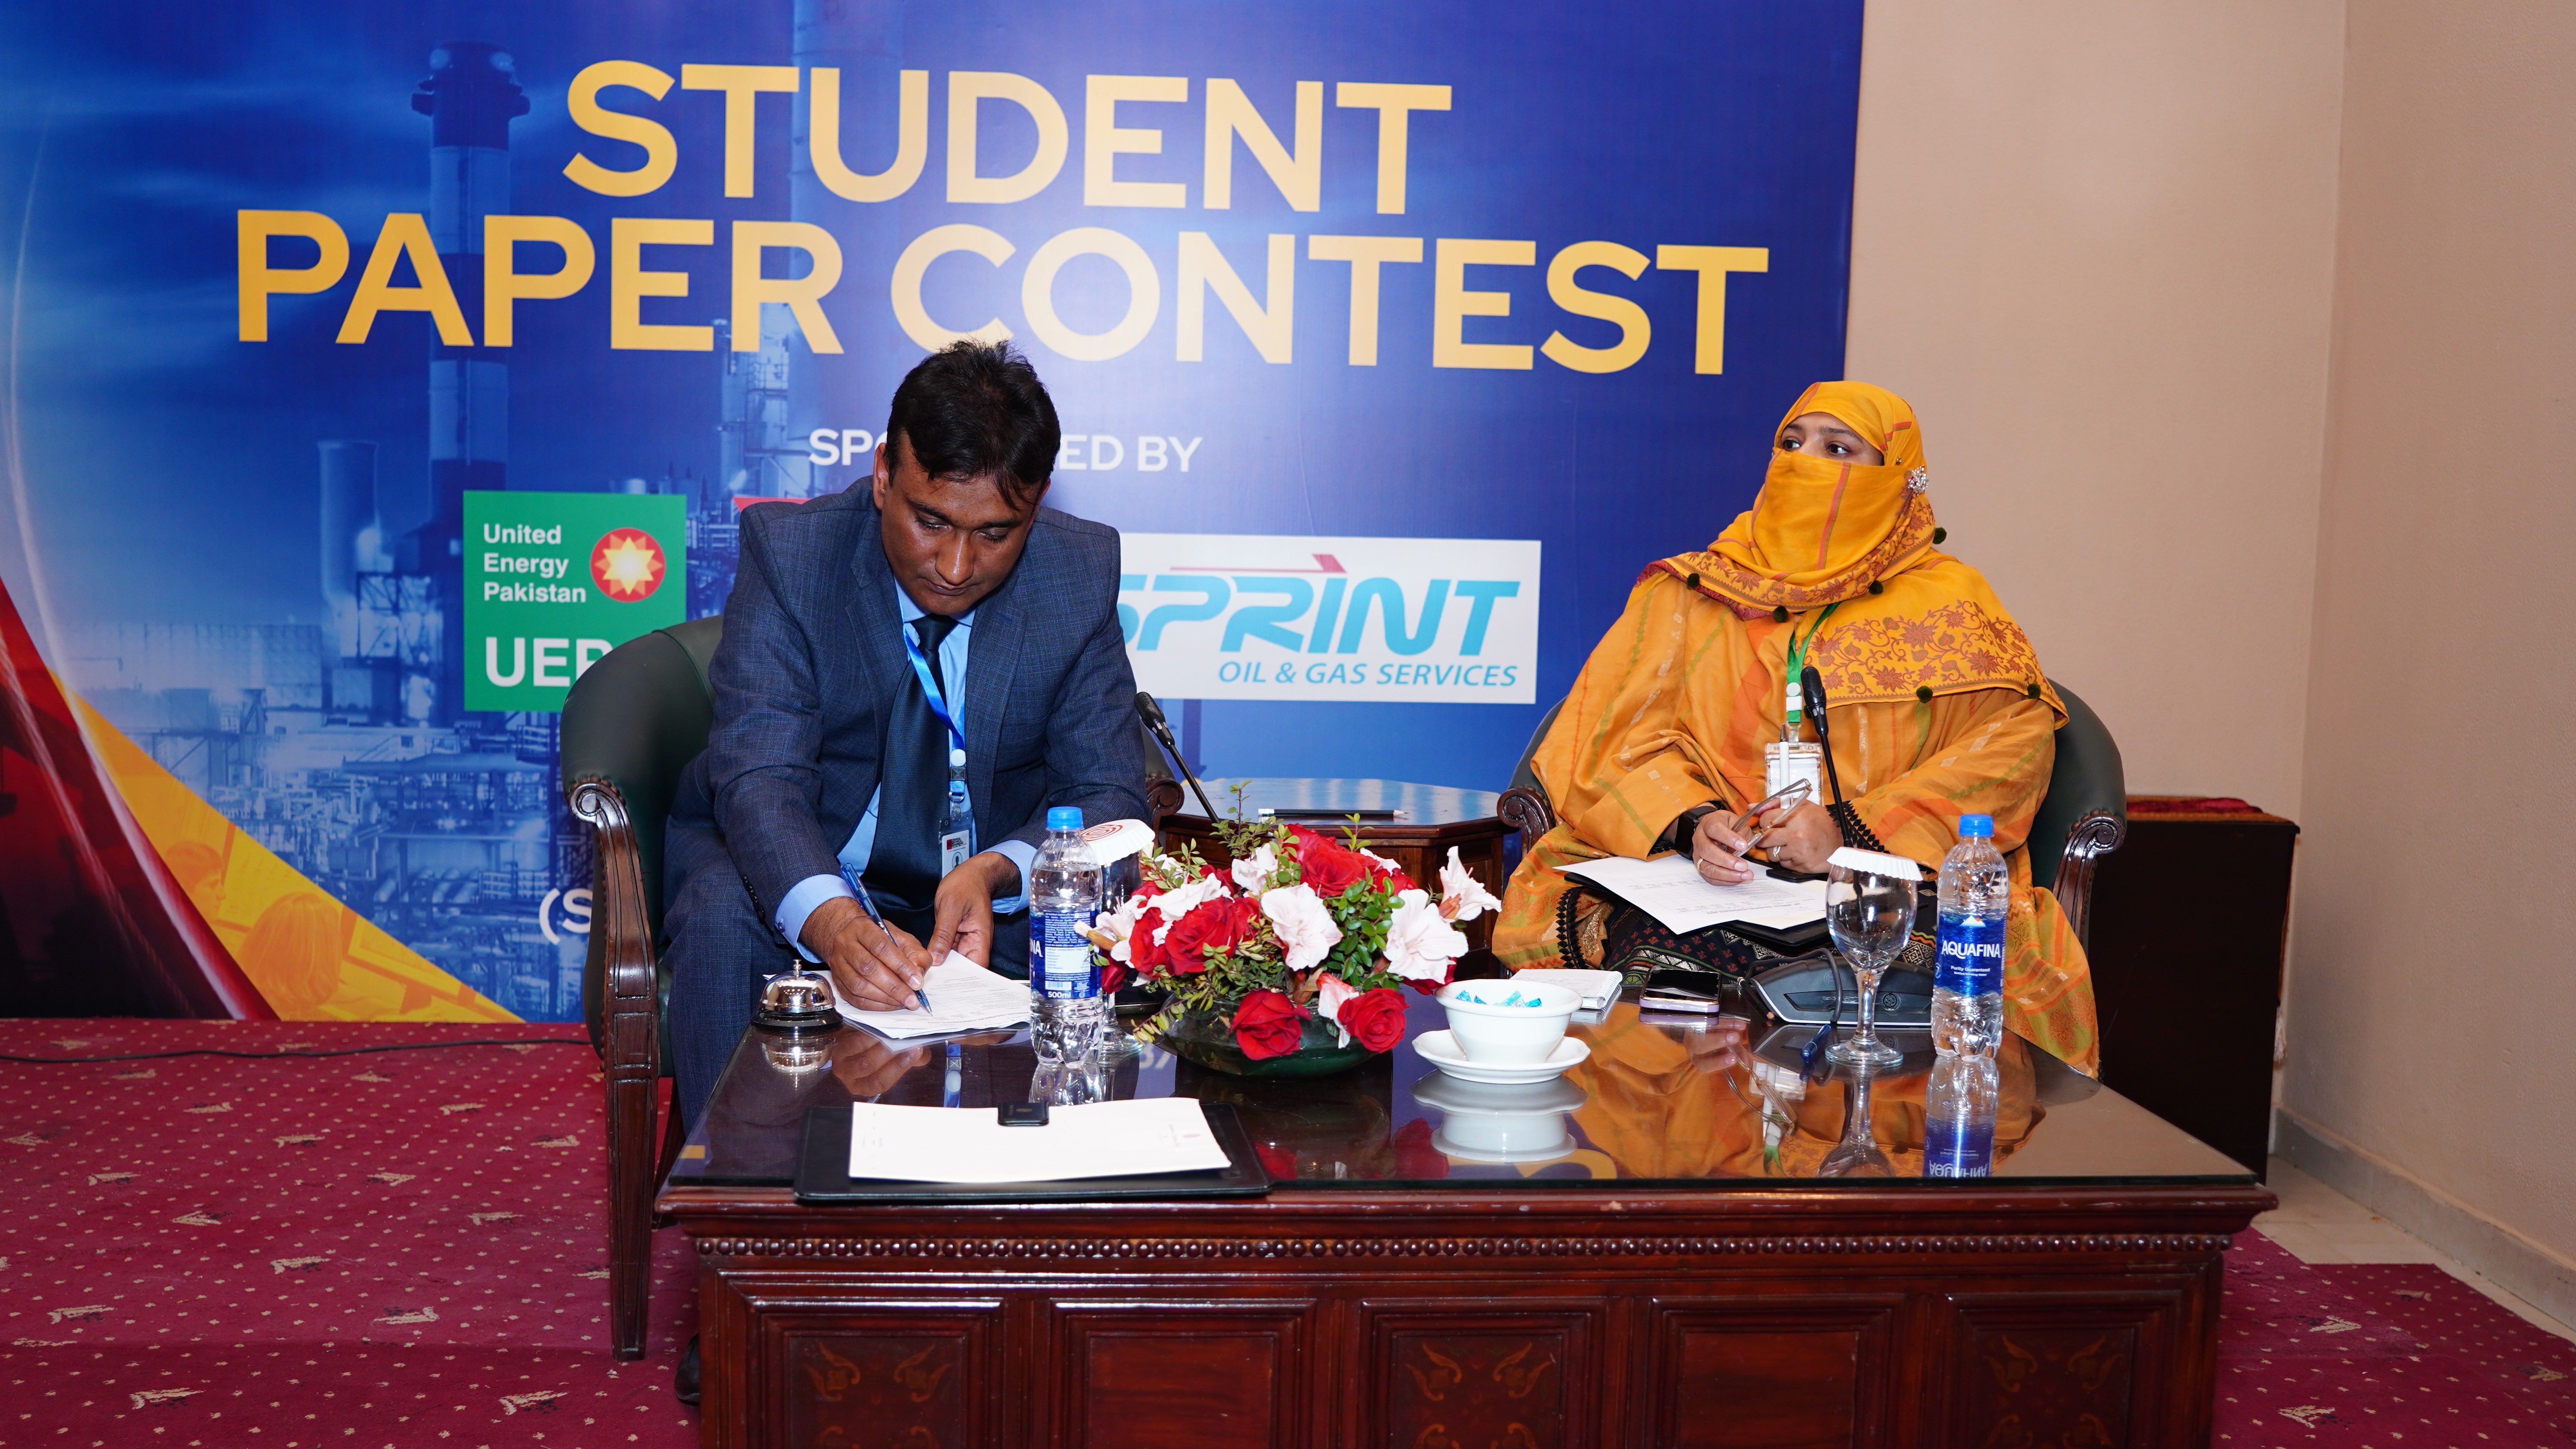 A penal discussion at student paper contest